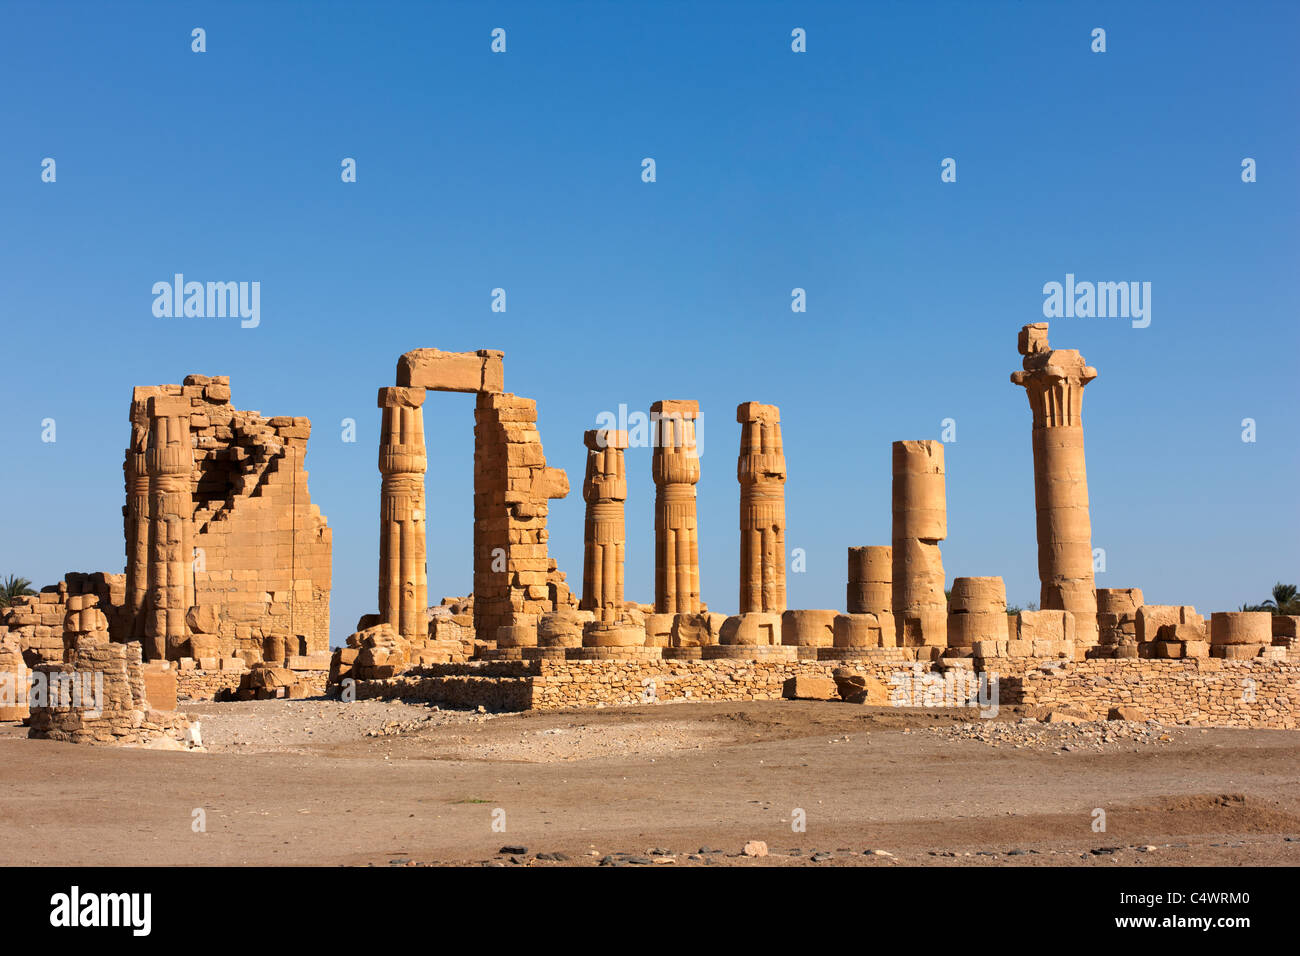 The Temple of Soleb, Soleb, Northern Sudan, Africa Stock Photo